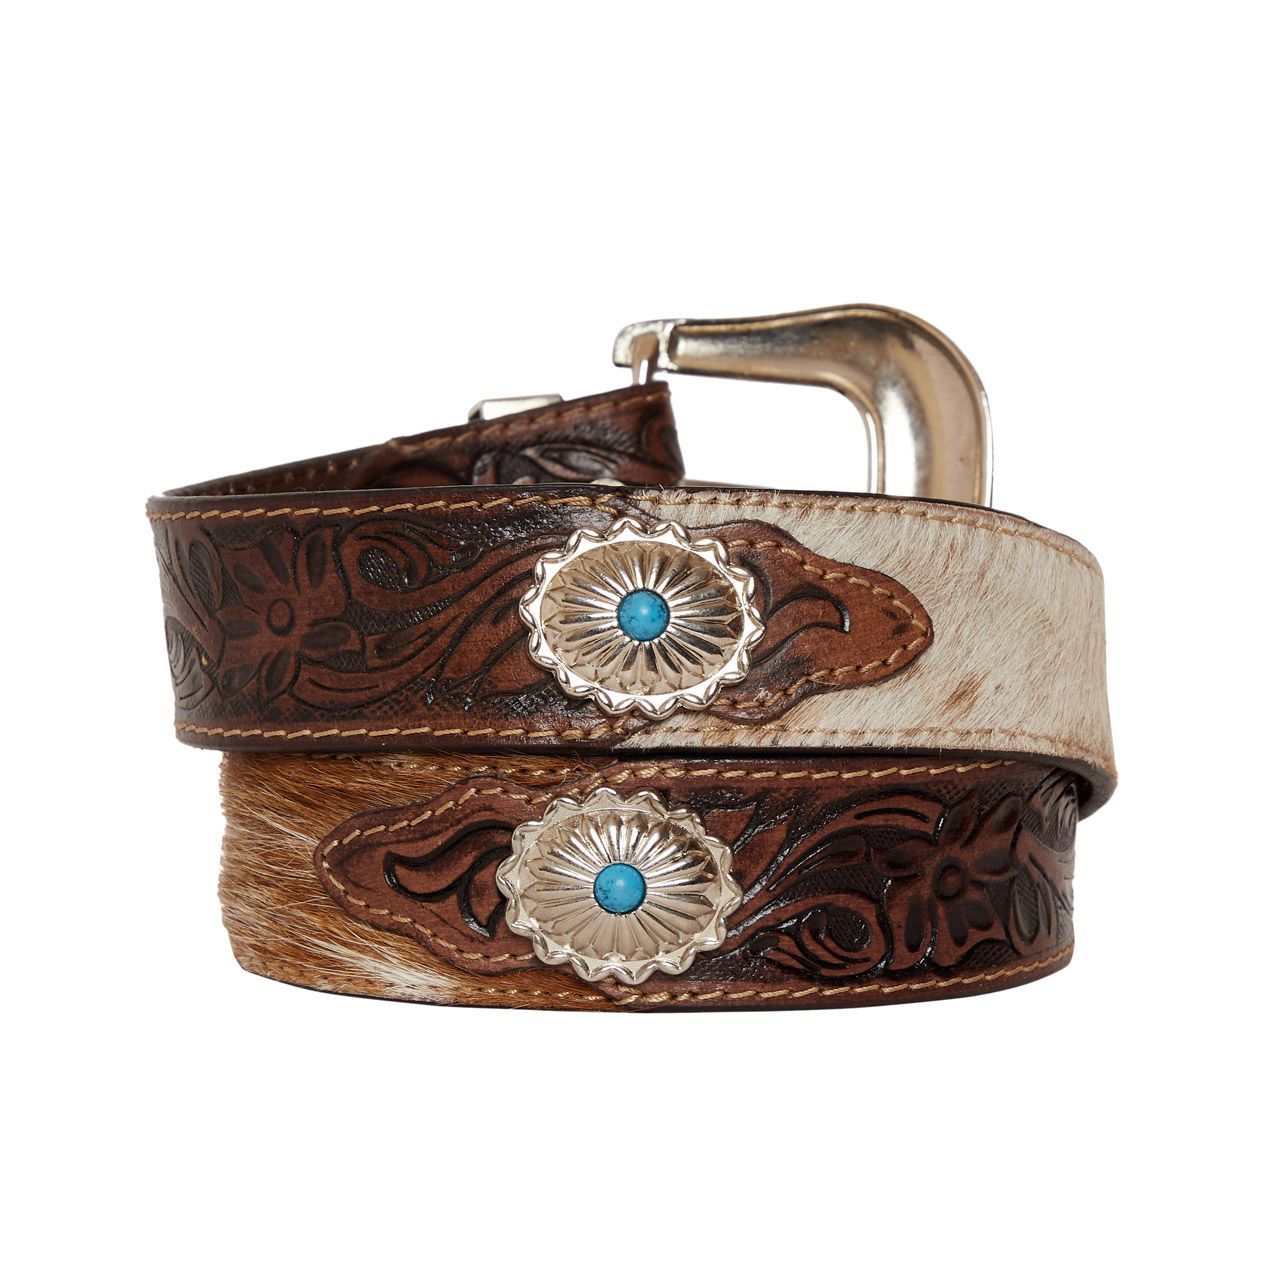 Myra- Mirky Brown Hand Tooled Leather Belt- Brown, White & Teal